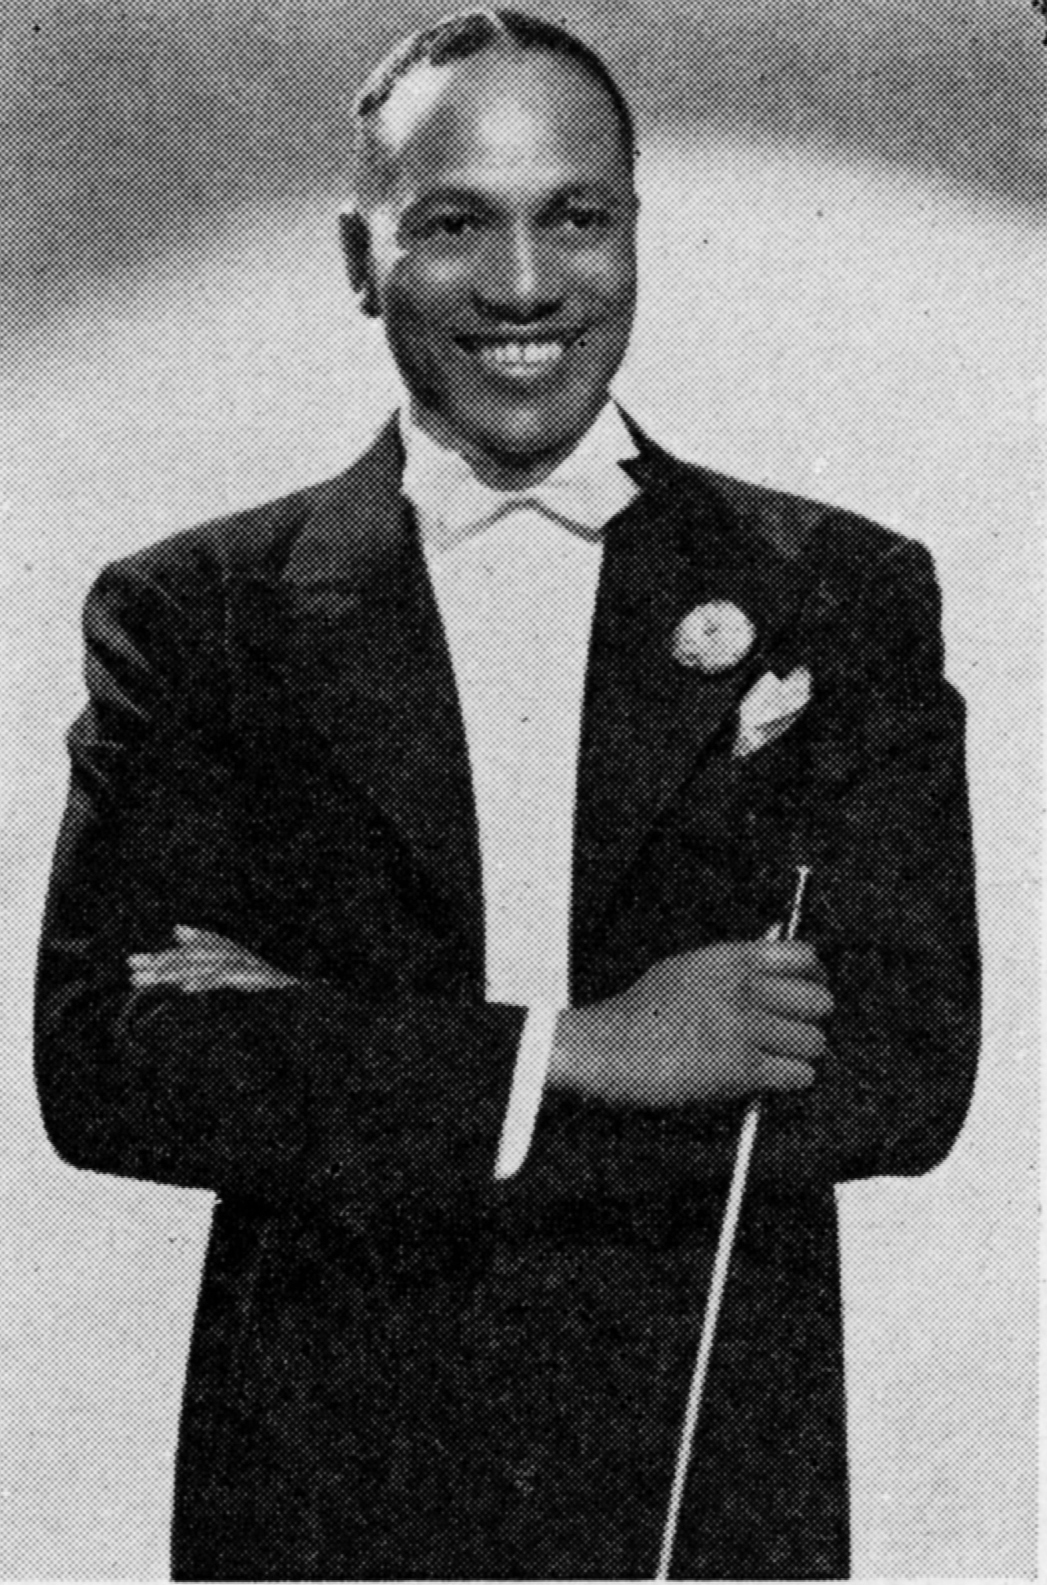 photograph of Andy Kirk smiling in a suit with a flower in the lapel. he holds a baton in his hand